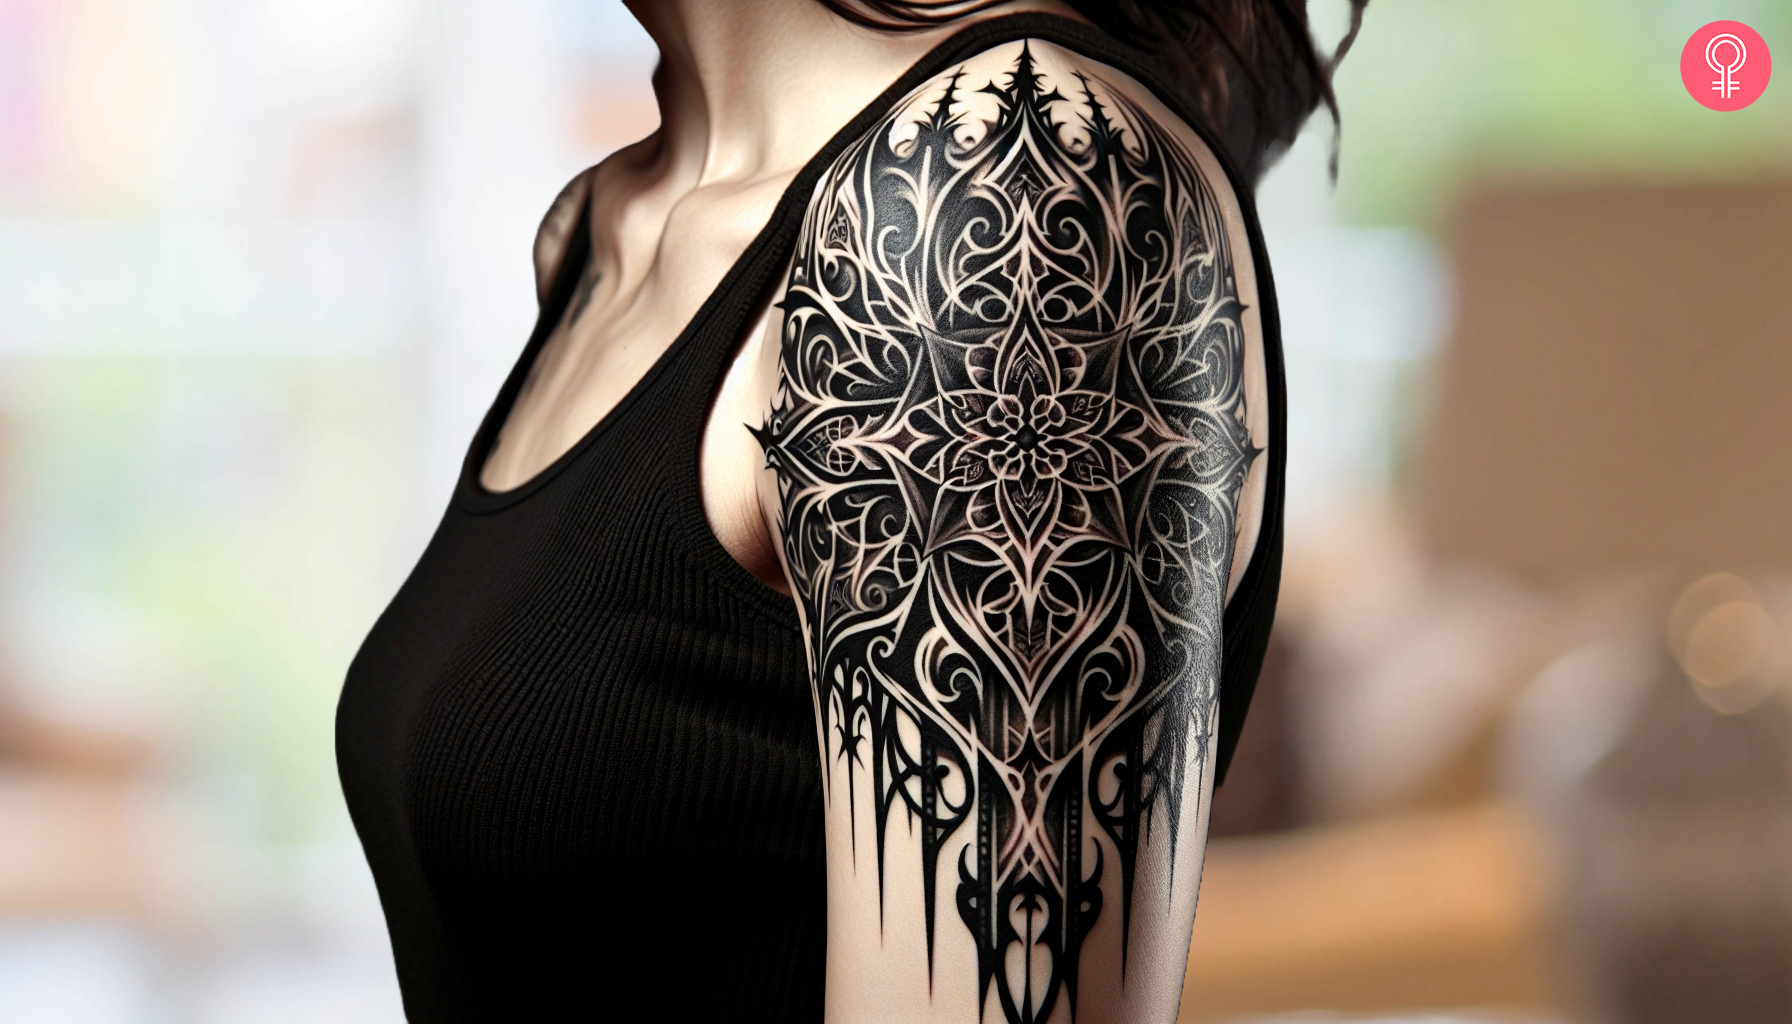 Woman with a Gothic tribal tattoo